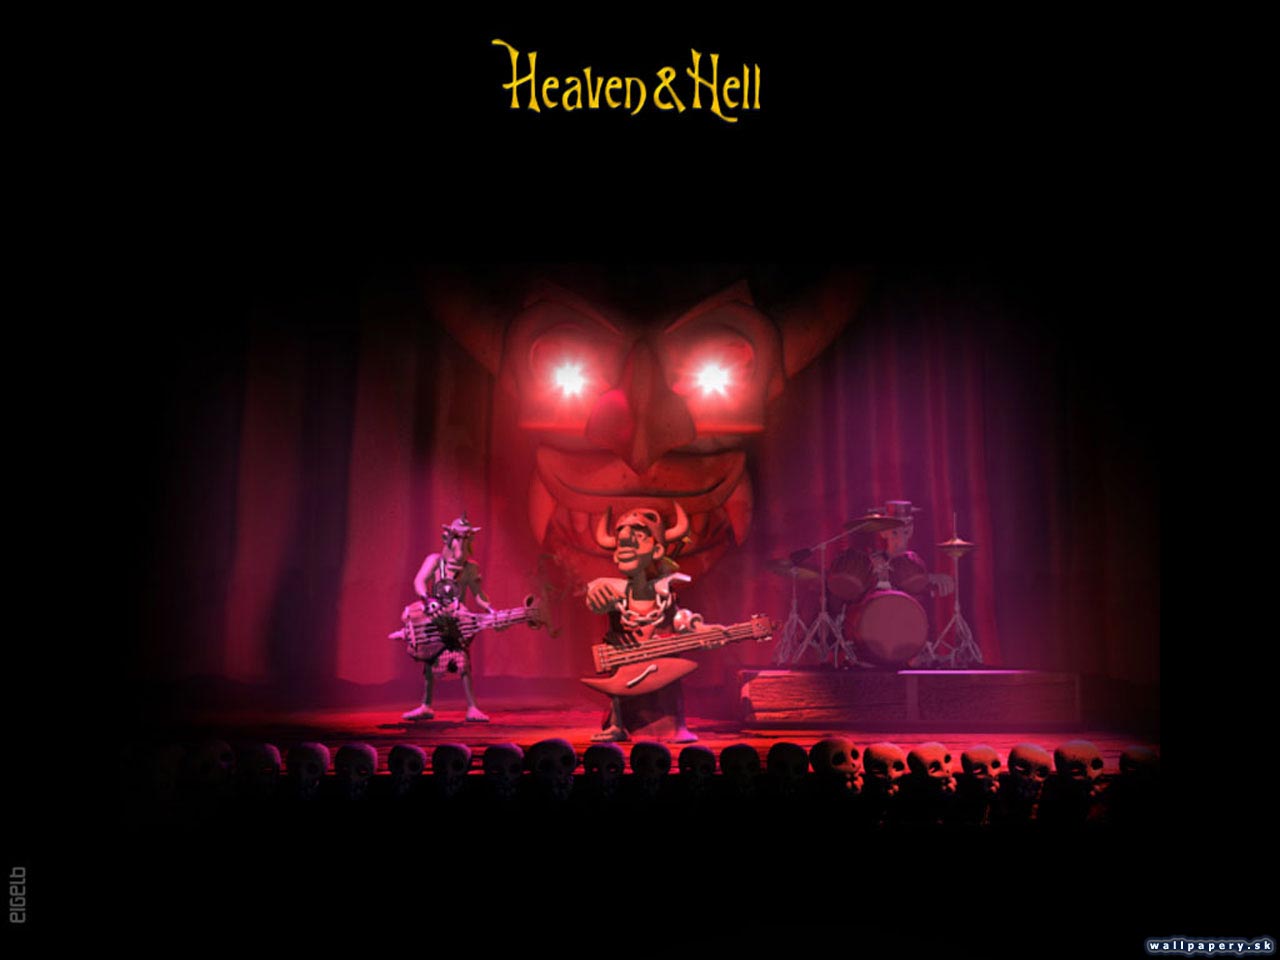 Heaven and Hell - wallpaper 2